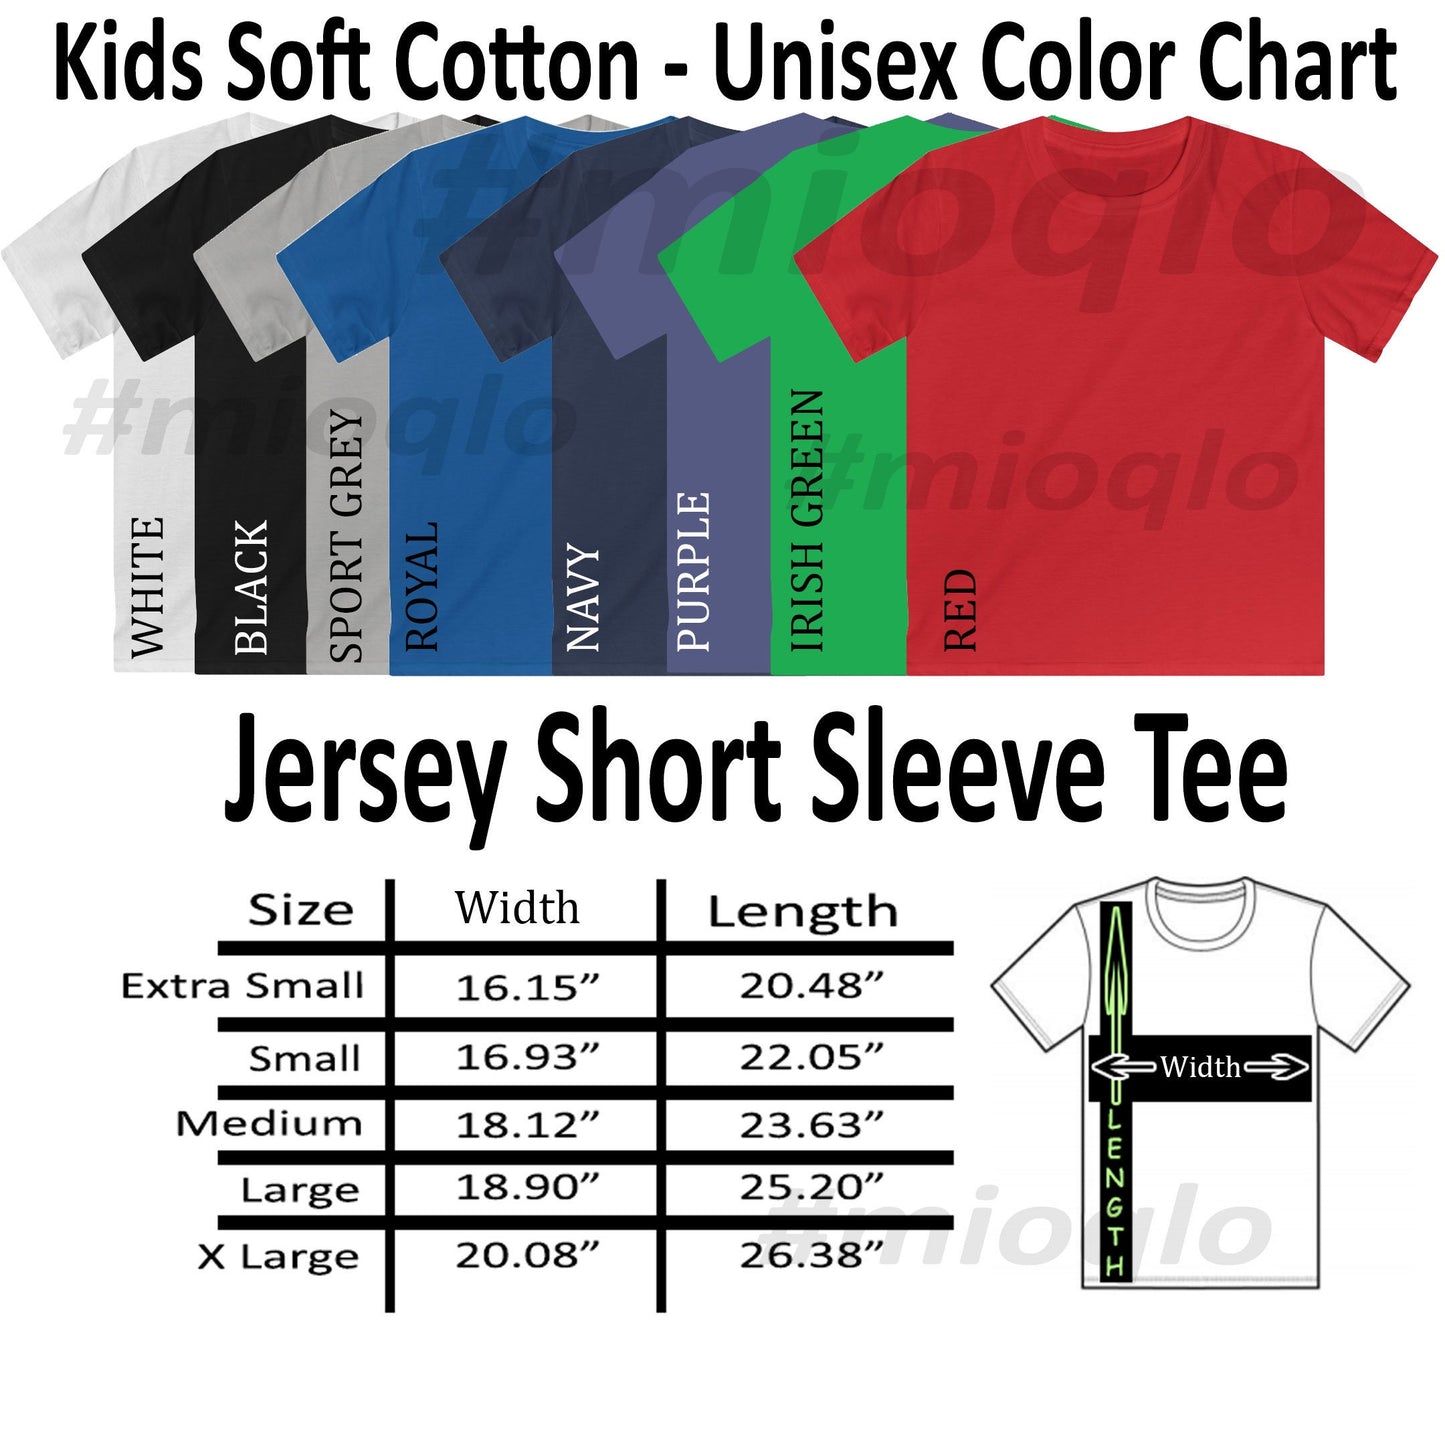 Third Grade Outfit, Rainbow Colored Text Custom Grade Grade Shirt, First Day Of School Tee, Back To School Tee, 2nd, 4th, 5th Grade School